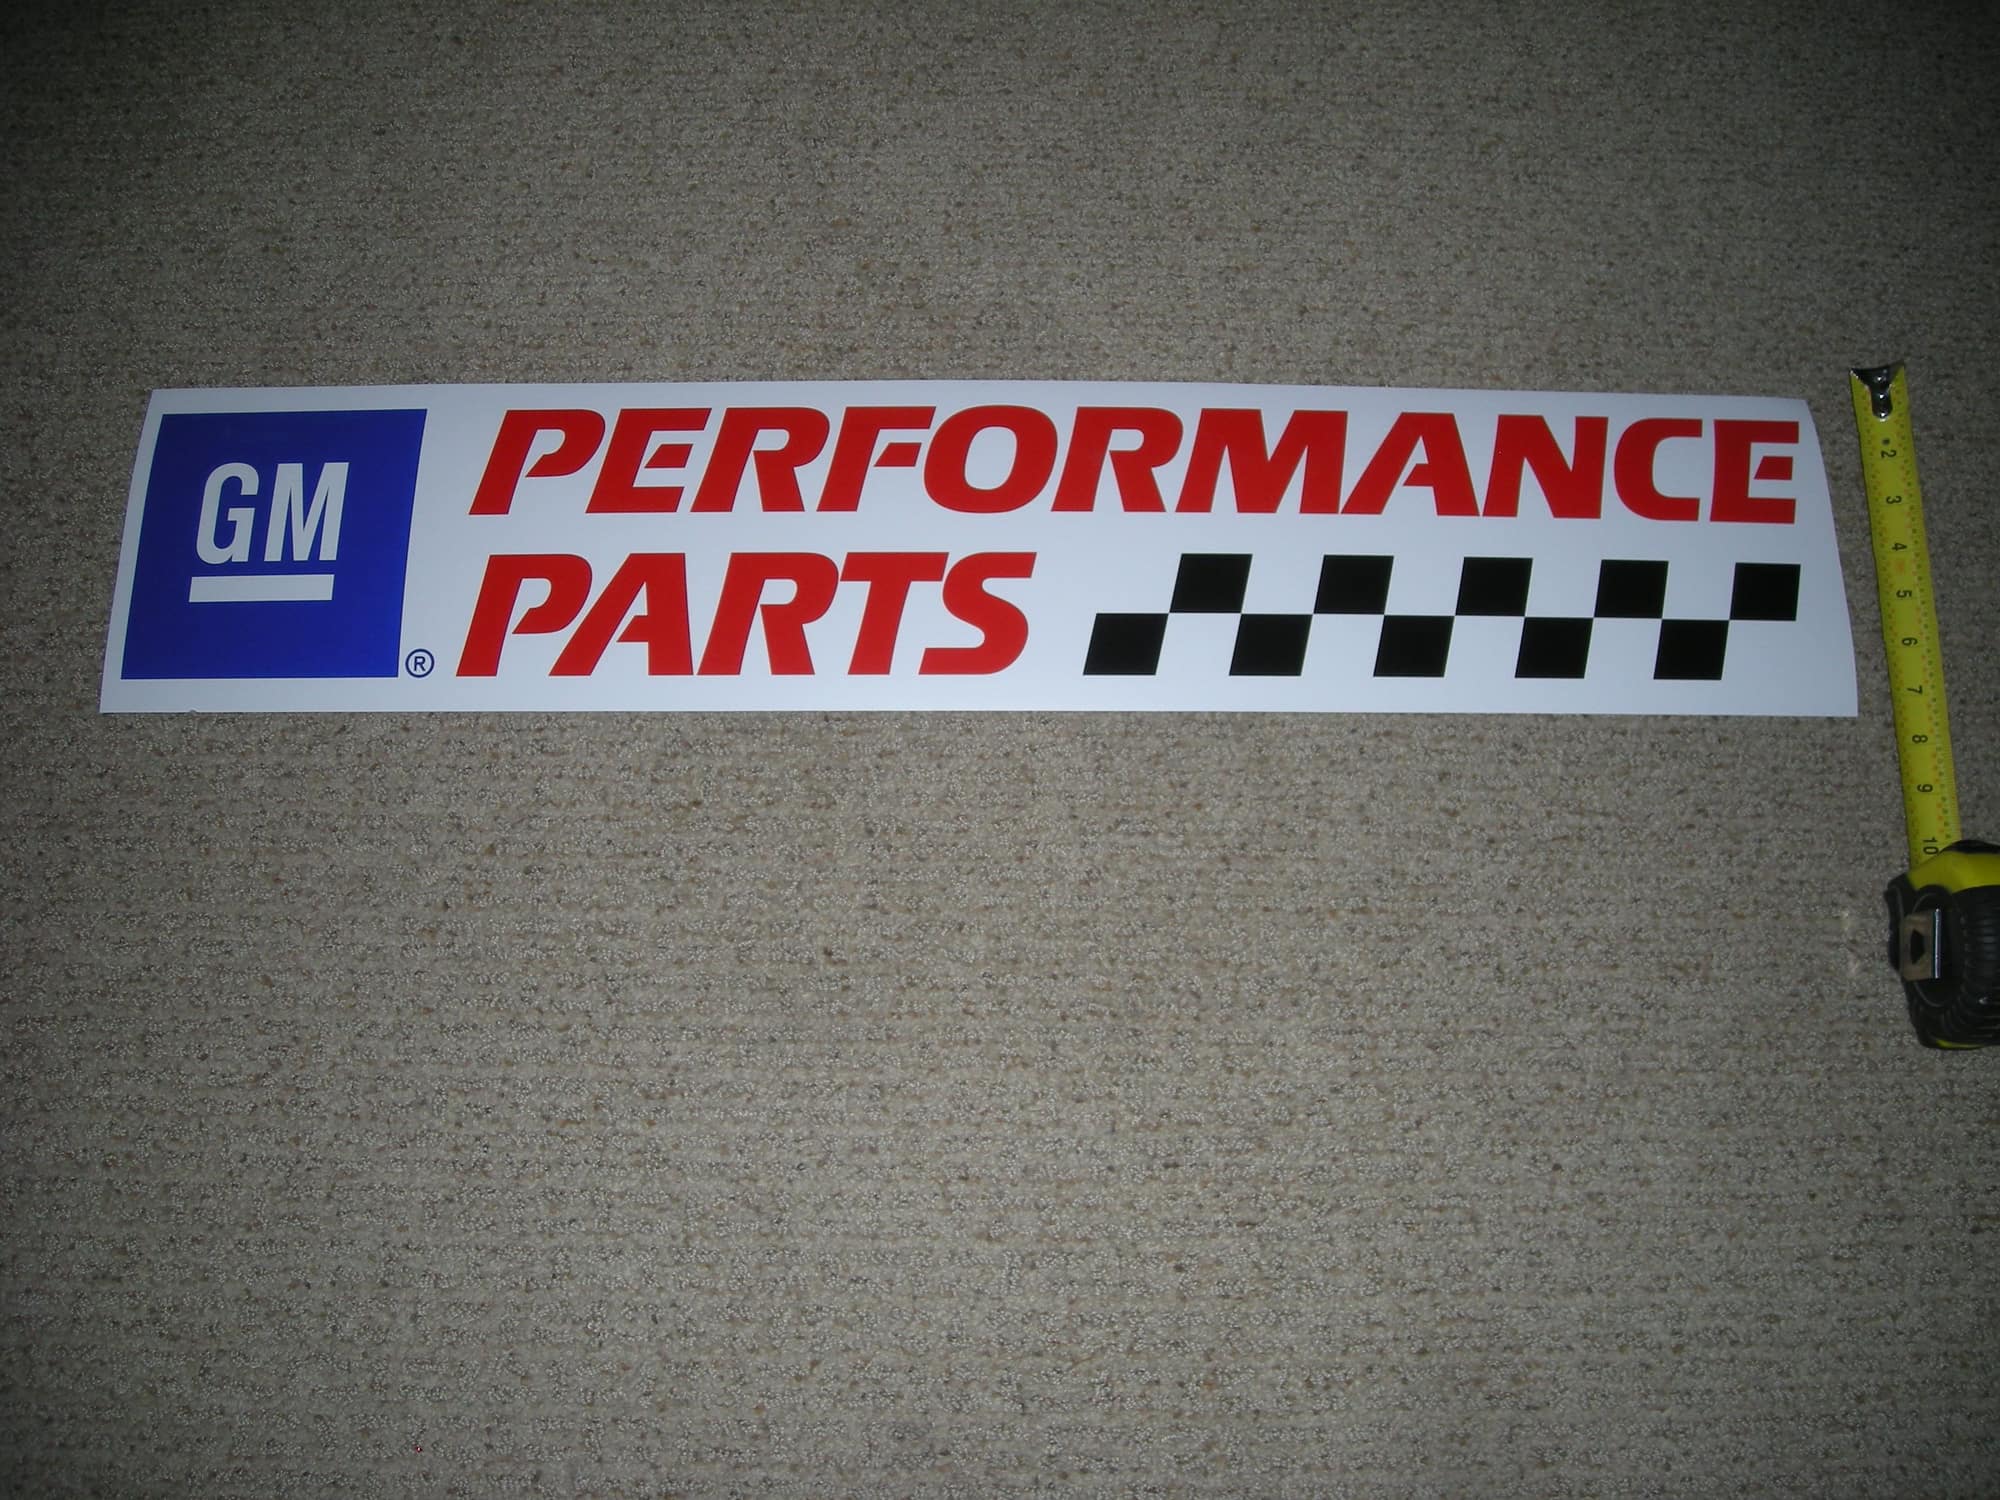  - 3 foot gm performance parts decal - Hazle Township, PA 18202, United States